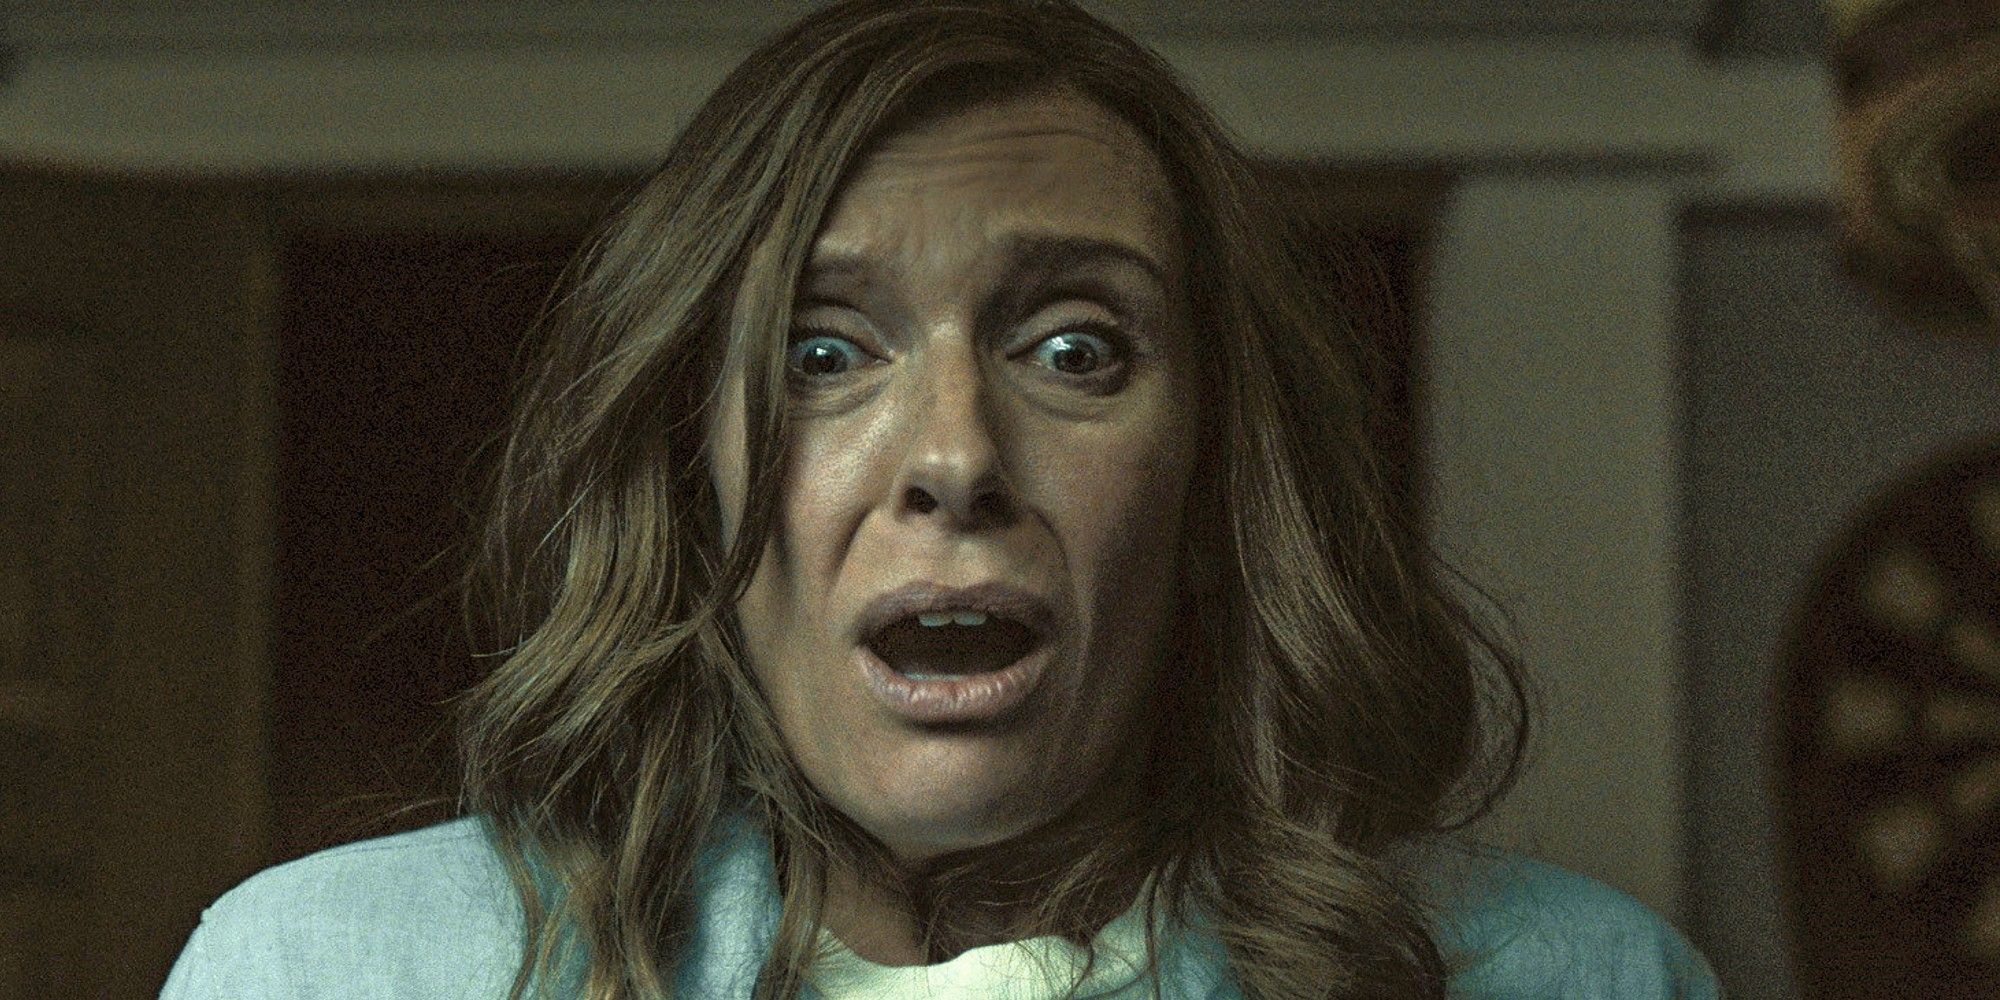 Toni Collette with a scared expression in Hereditary